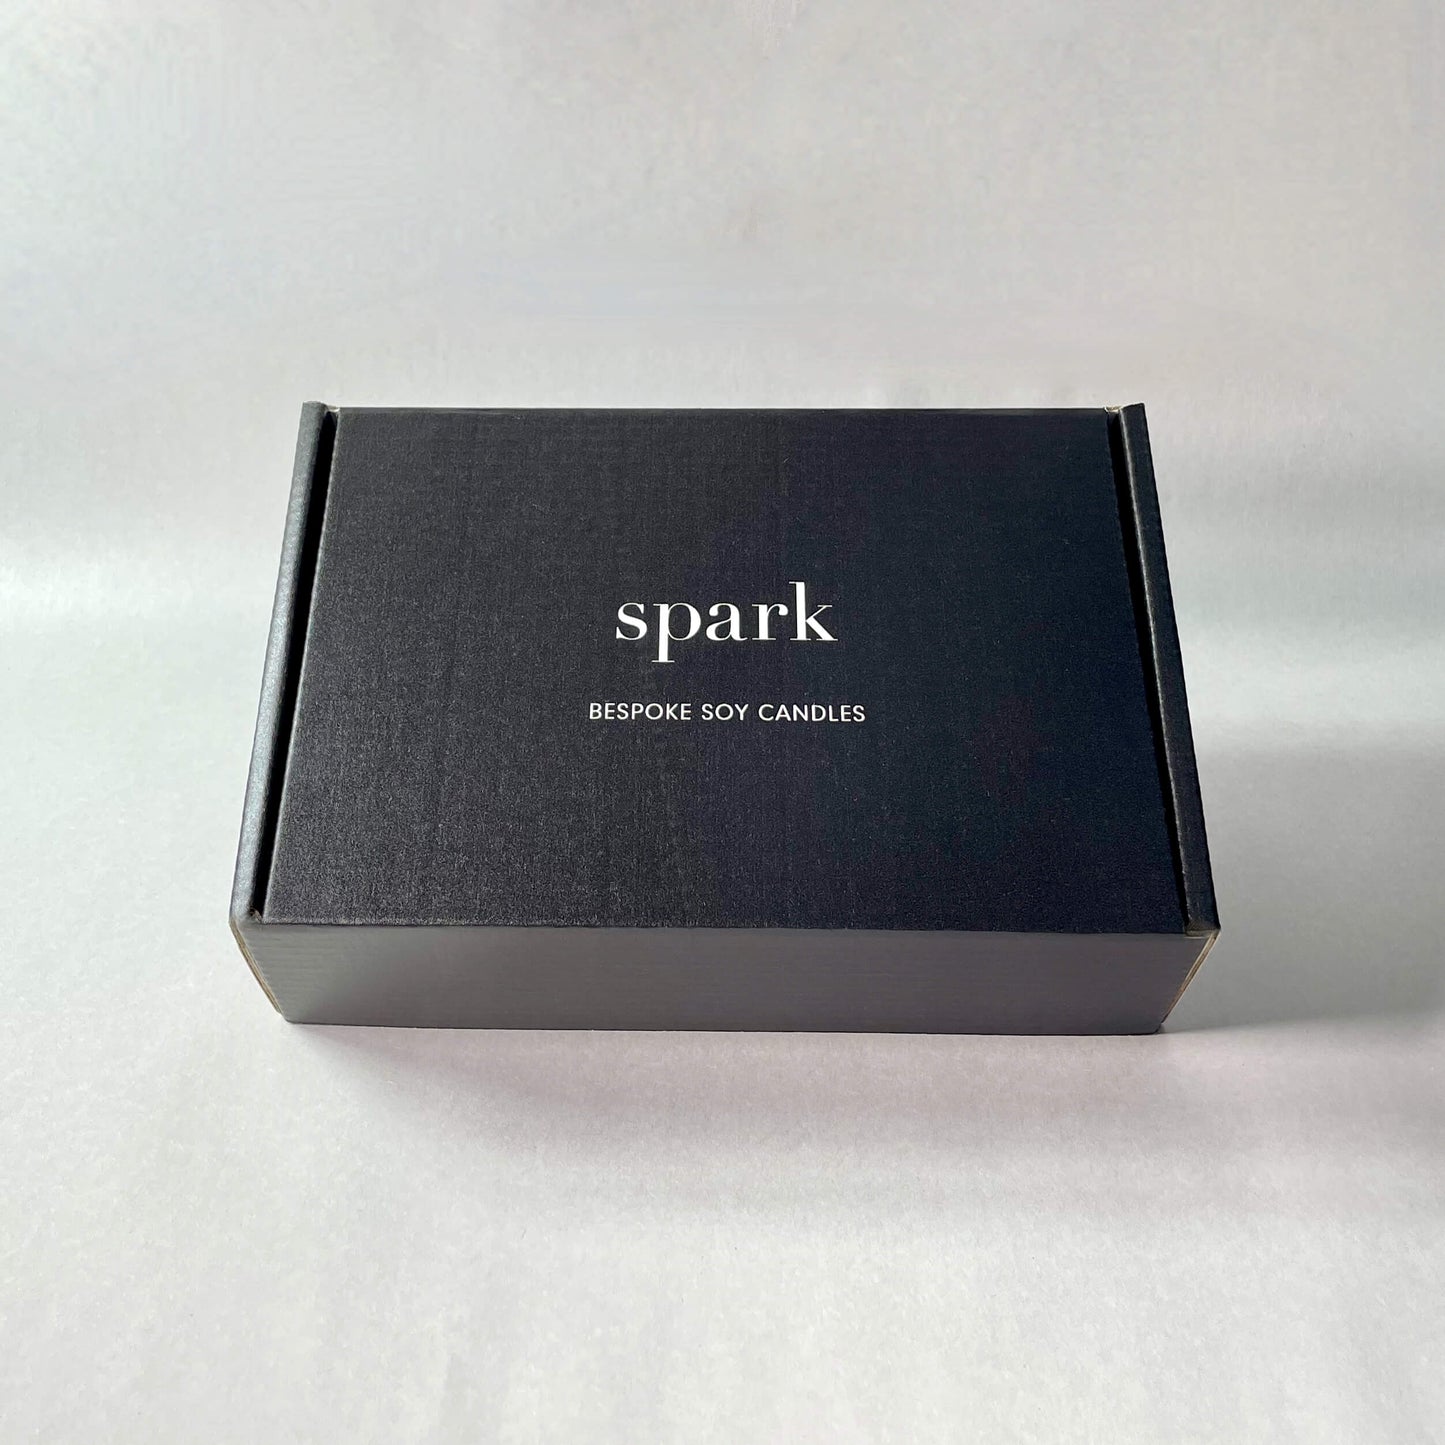 Load image into Gallery viewer, Spark Candles Welcome Pack - 5x Gold Tins - Choose Scents, Free Shipping - Spark Candles
